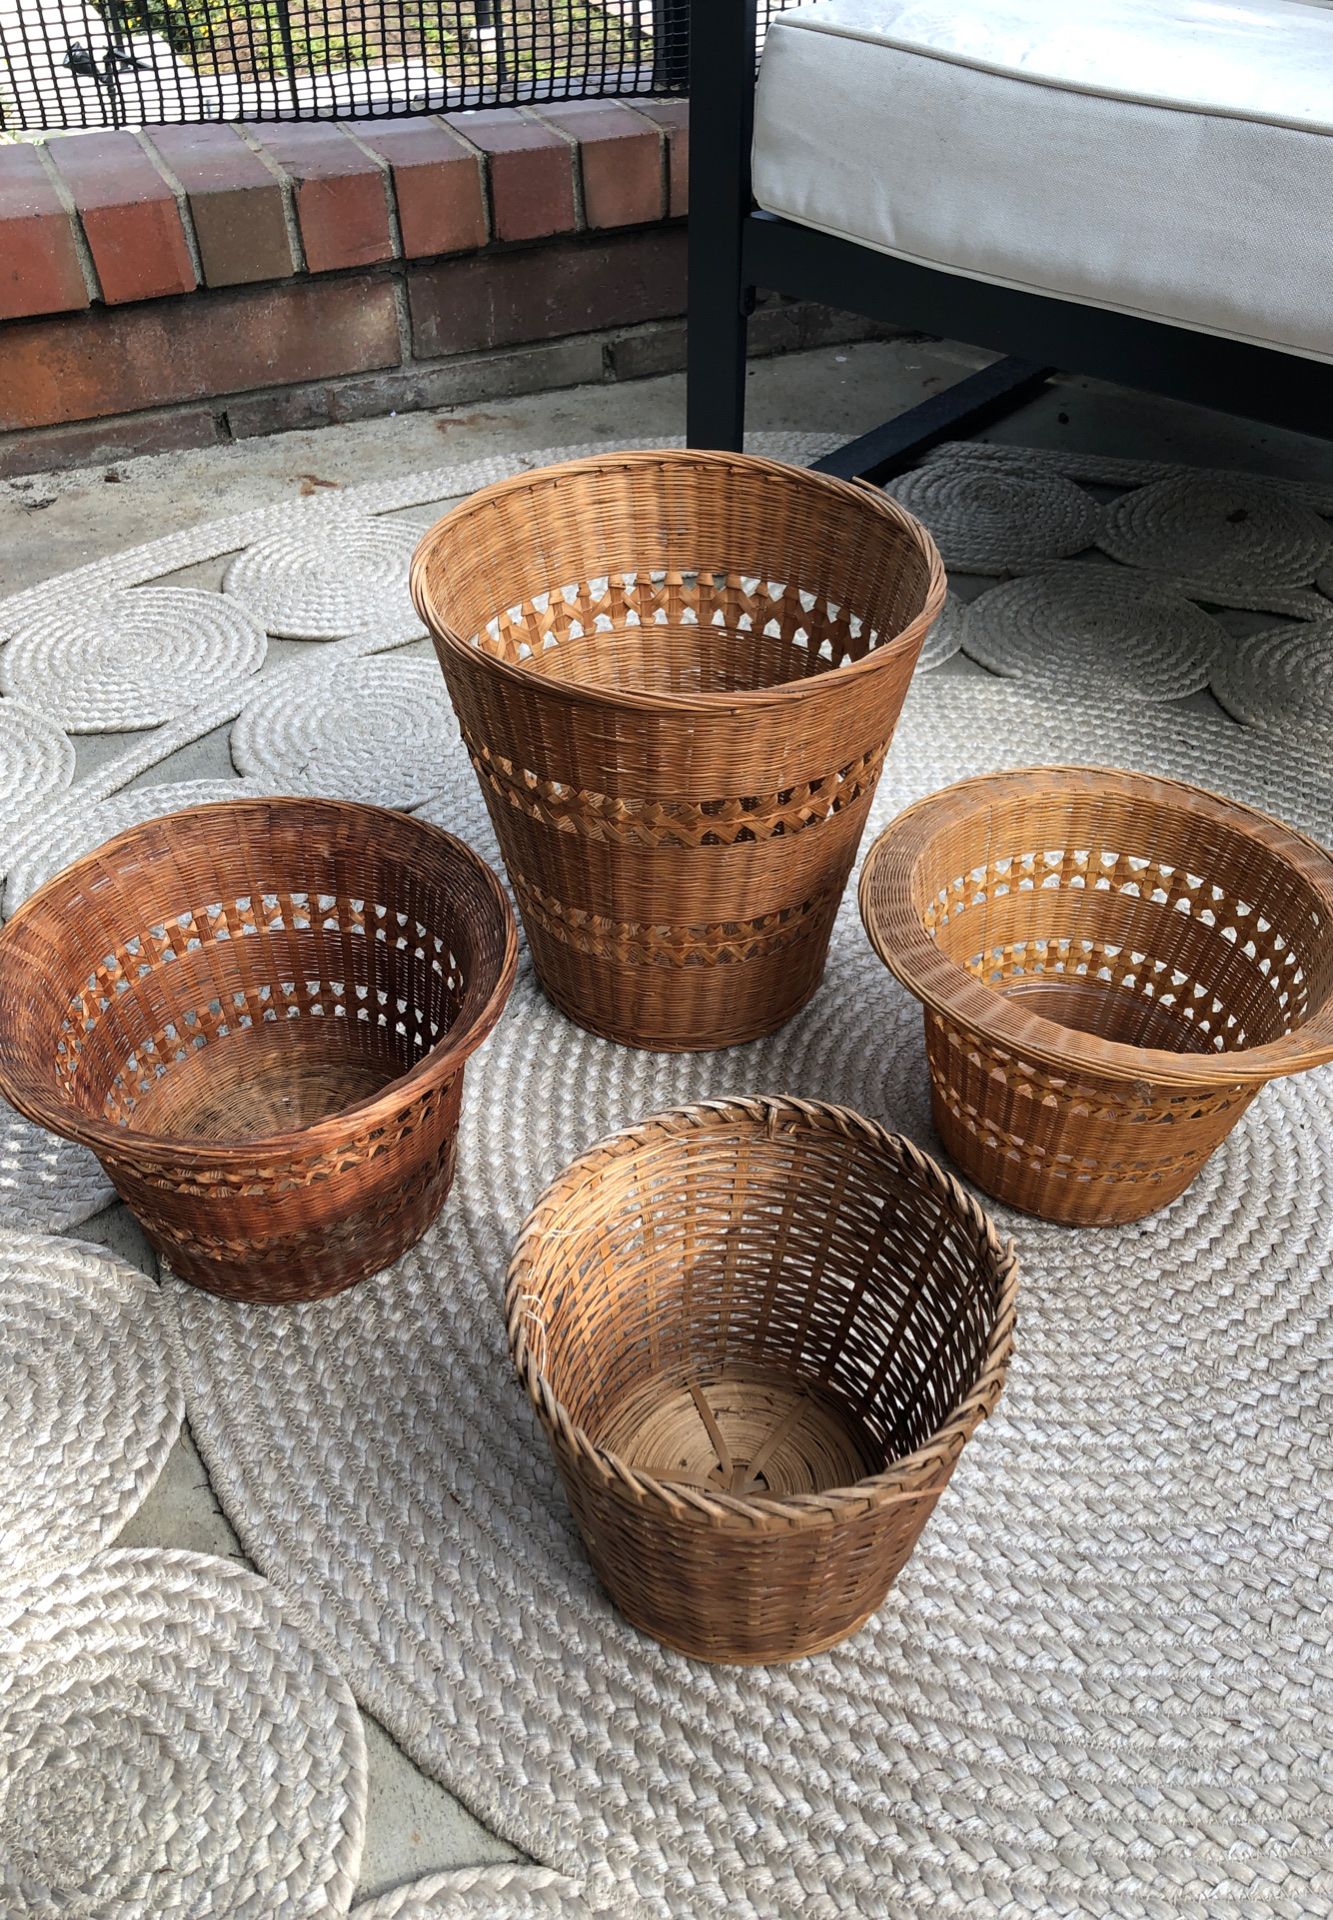 Vintage Plant Baskets as a Set or Separately